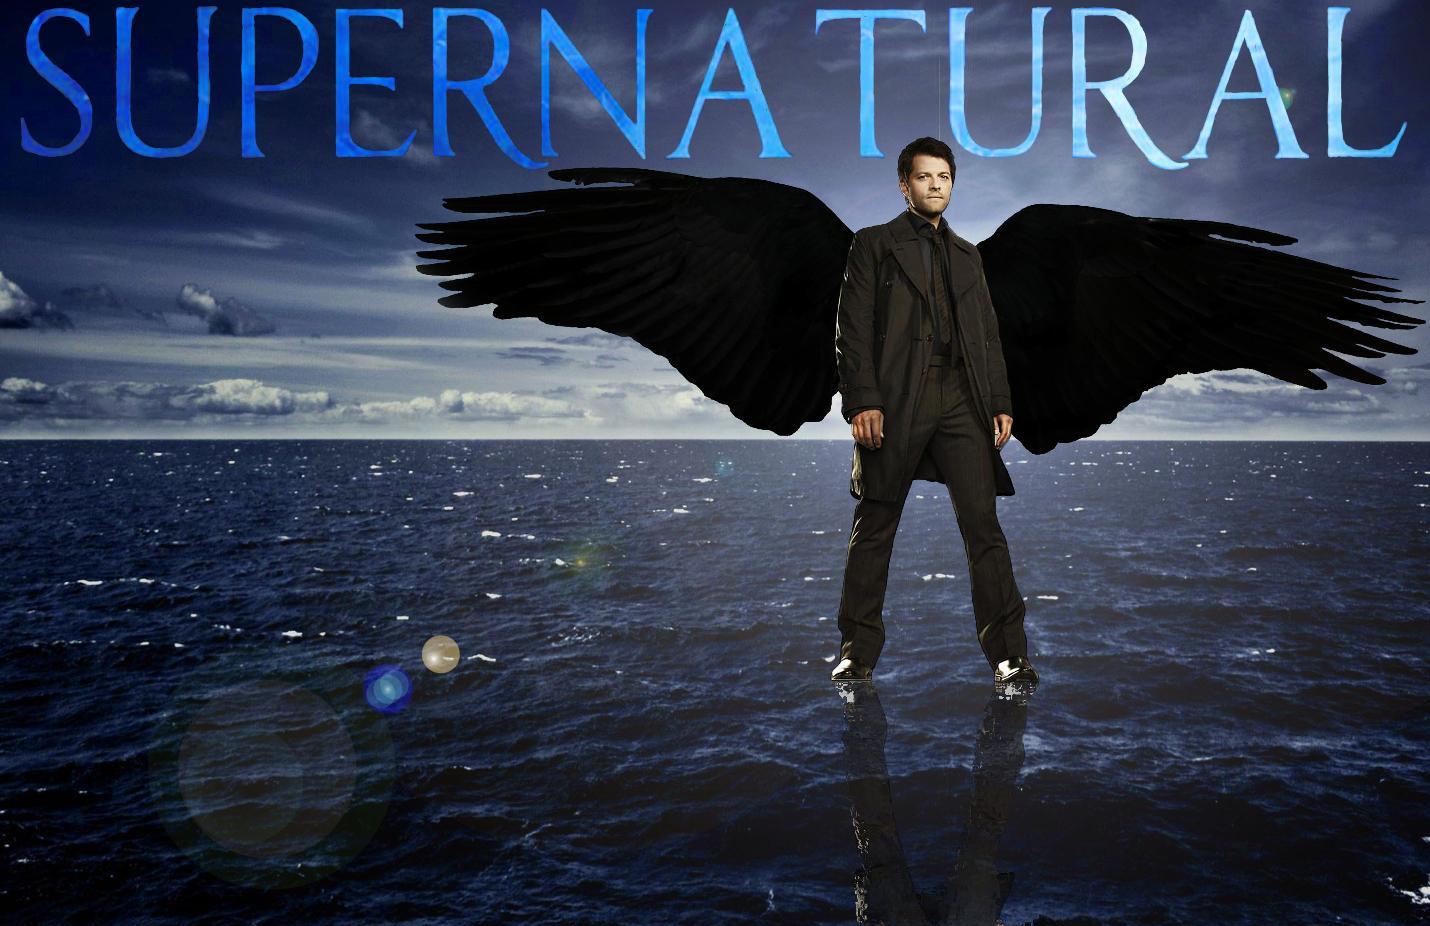 Supernatural Poster Gallery9 | Tv Series Posters and Cast1430 x 926